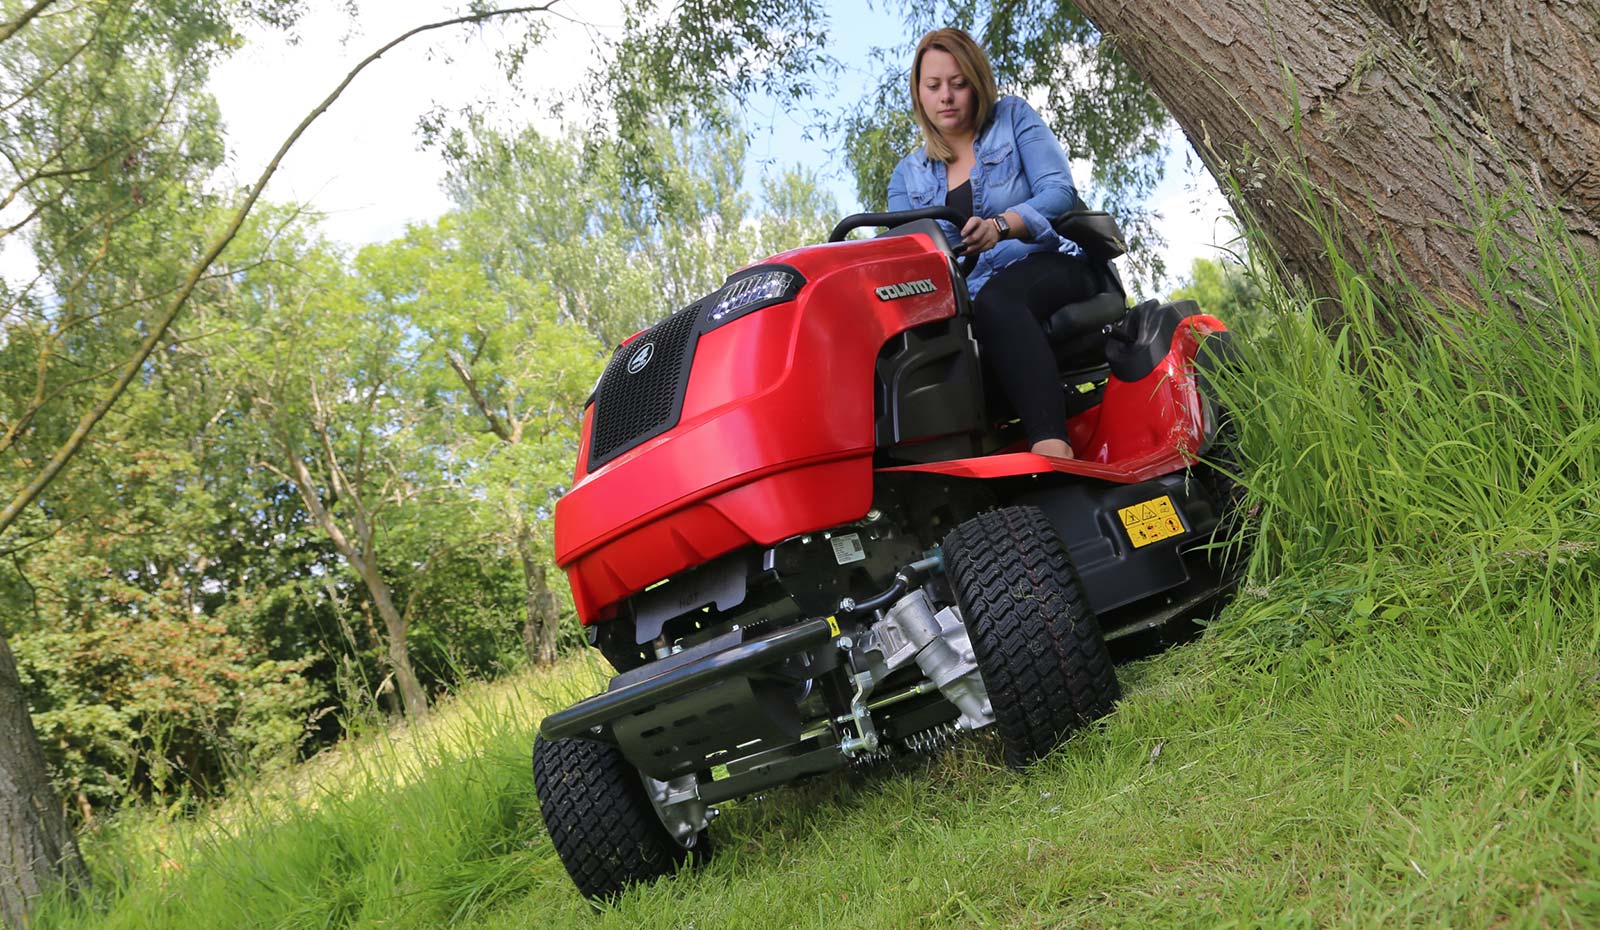 Countax B Series 4WD garden tractor ride on mower with HGM cutter deck cutting around tree